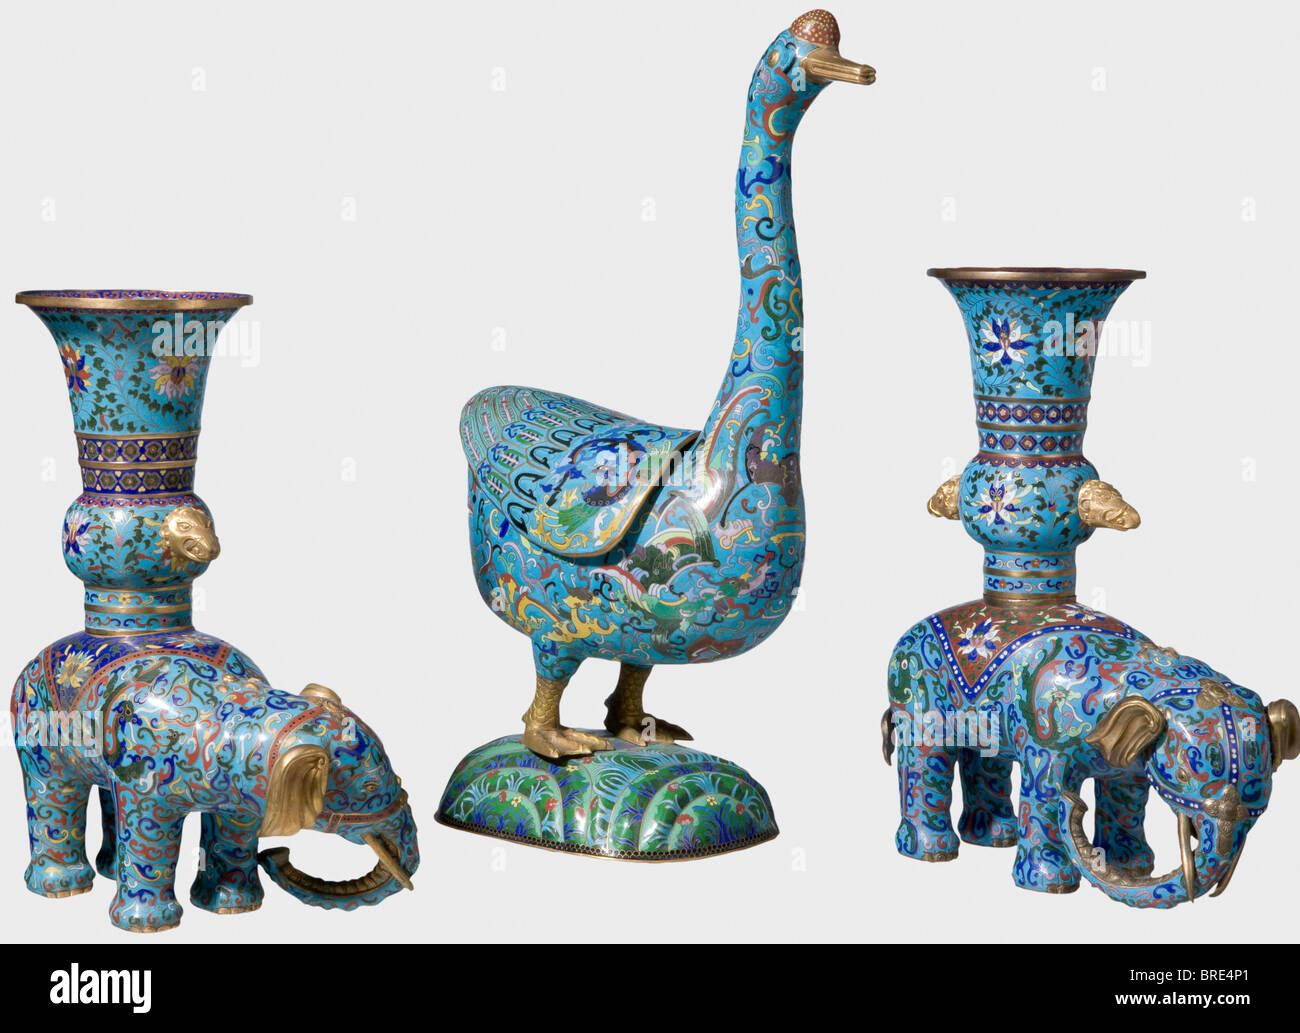 Princess Elsa of Württemberg (1876 - 1936), a Chinese champlevé goose and two elephants from the Asian room, circa 1900 Gilded bronze richly decorated with enamel. Made in several pieces. An inventory label, 'P.E. v.W. Privat Eigentum' (Personal property), for Princess Elsa of Württemberg, on the bottom of each piece. Height of the goose 66.5 cm. Heights of the elephants 45 and 47 cm. historic, historical, 1900s, 20th century, 19th century, vessel, vessels, object, objects, stills, clipping, clippings, cut out, cut-out, cut-outs, Stock Photo